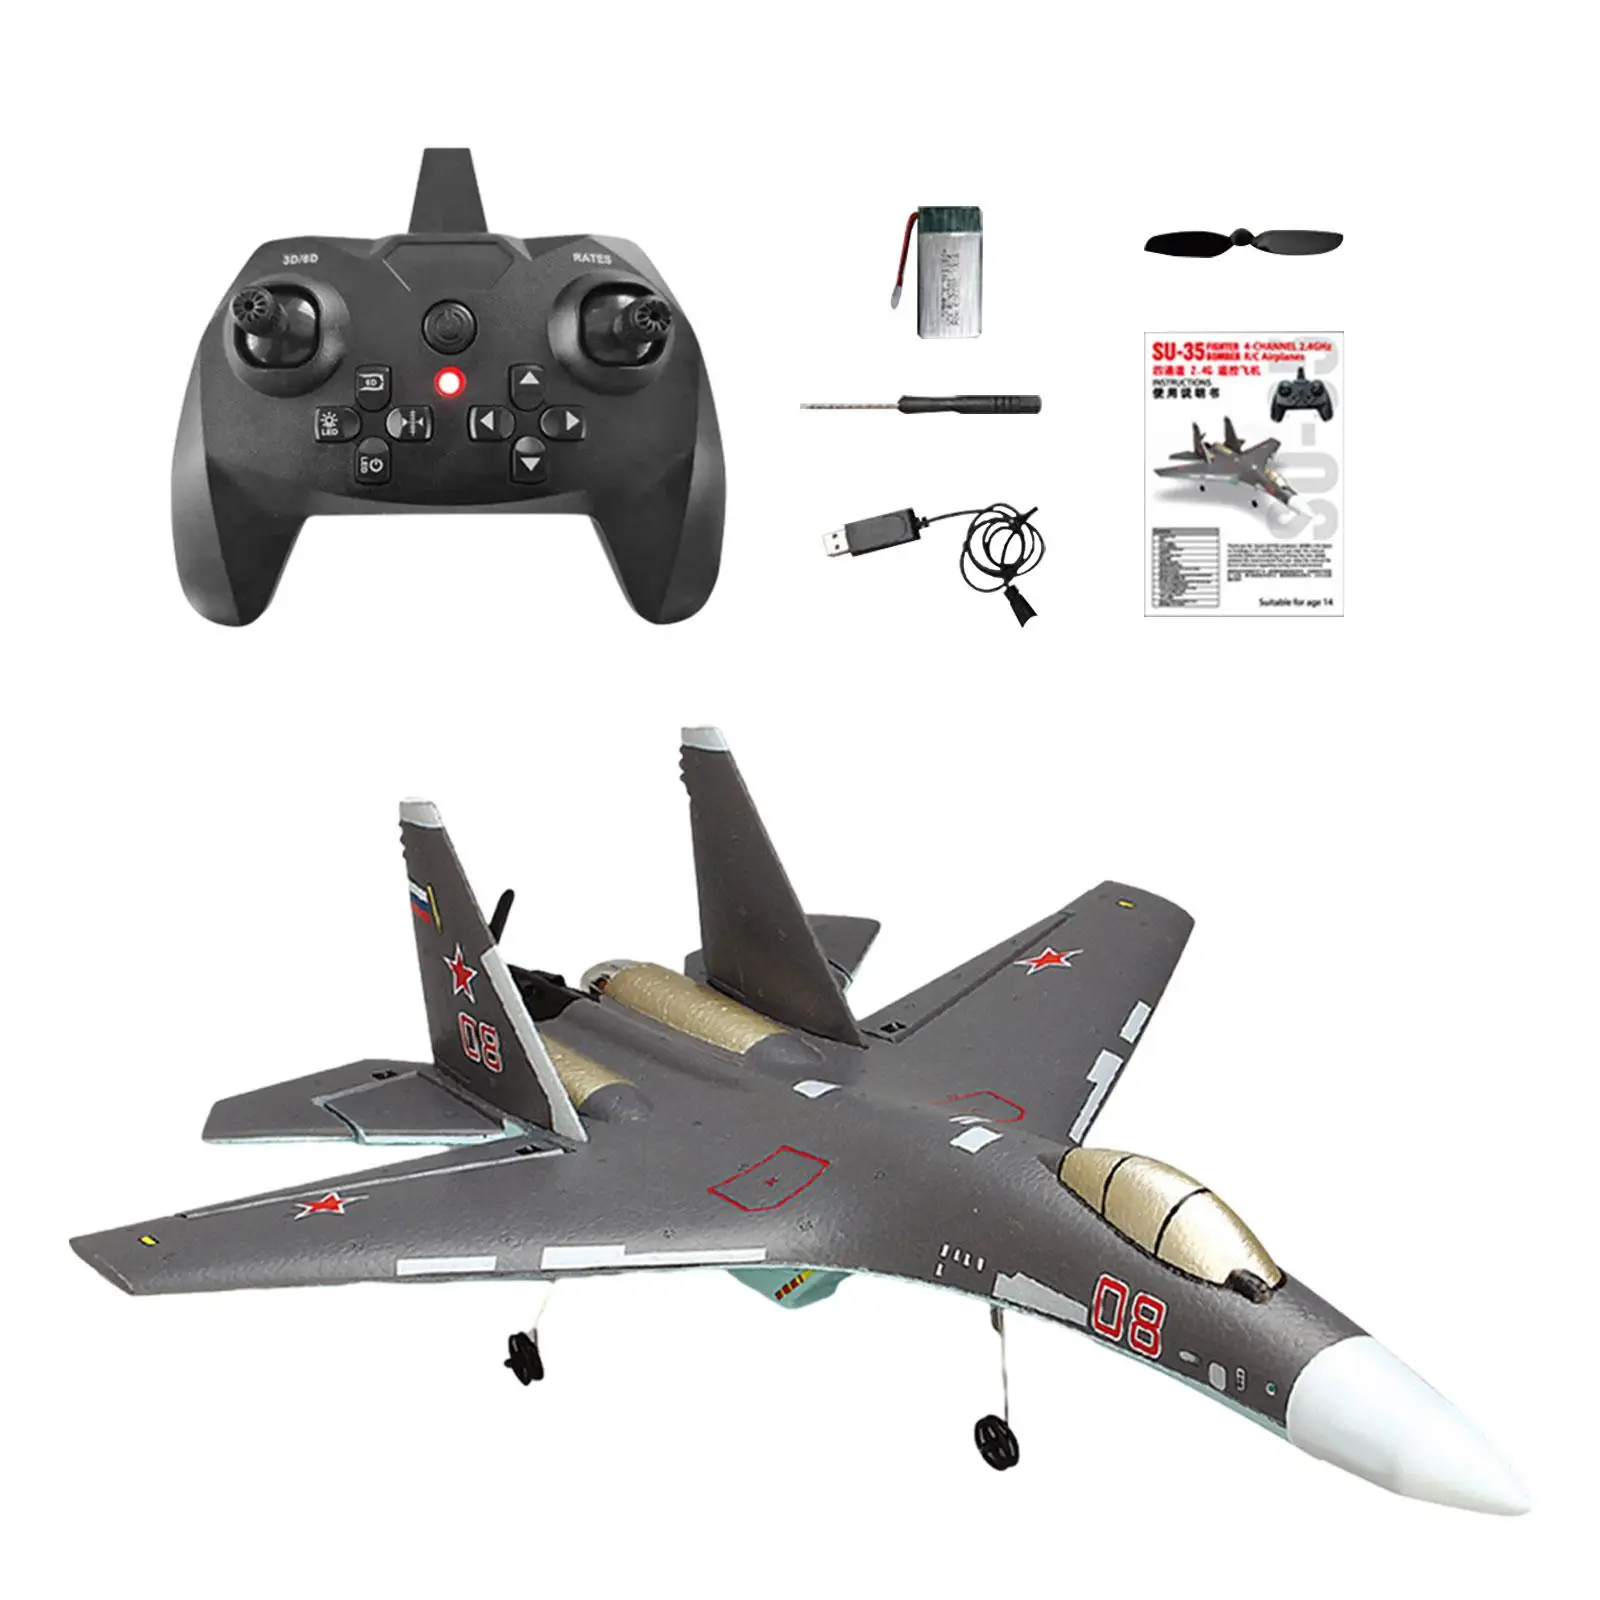 Remote Control Airplane 4CH Flying Time 15Min Control Distance 300Meter 6 Axis Fighter Jet for Boys Adults Teens Beginners